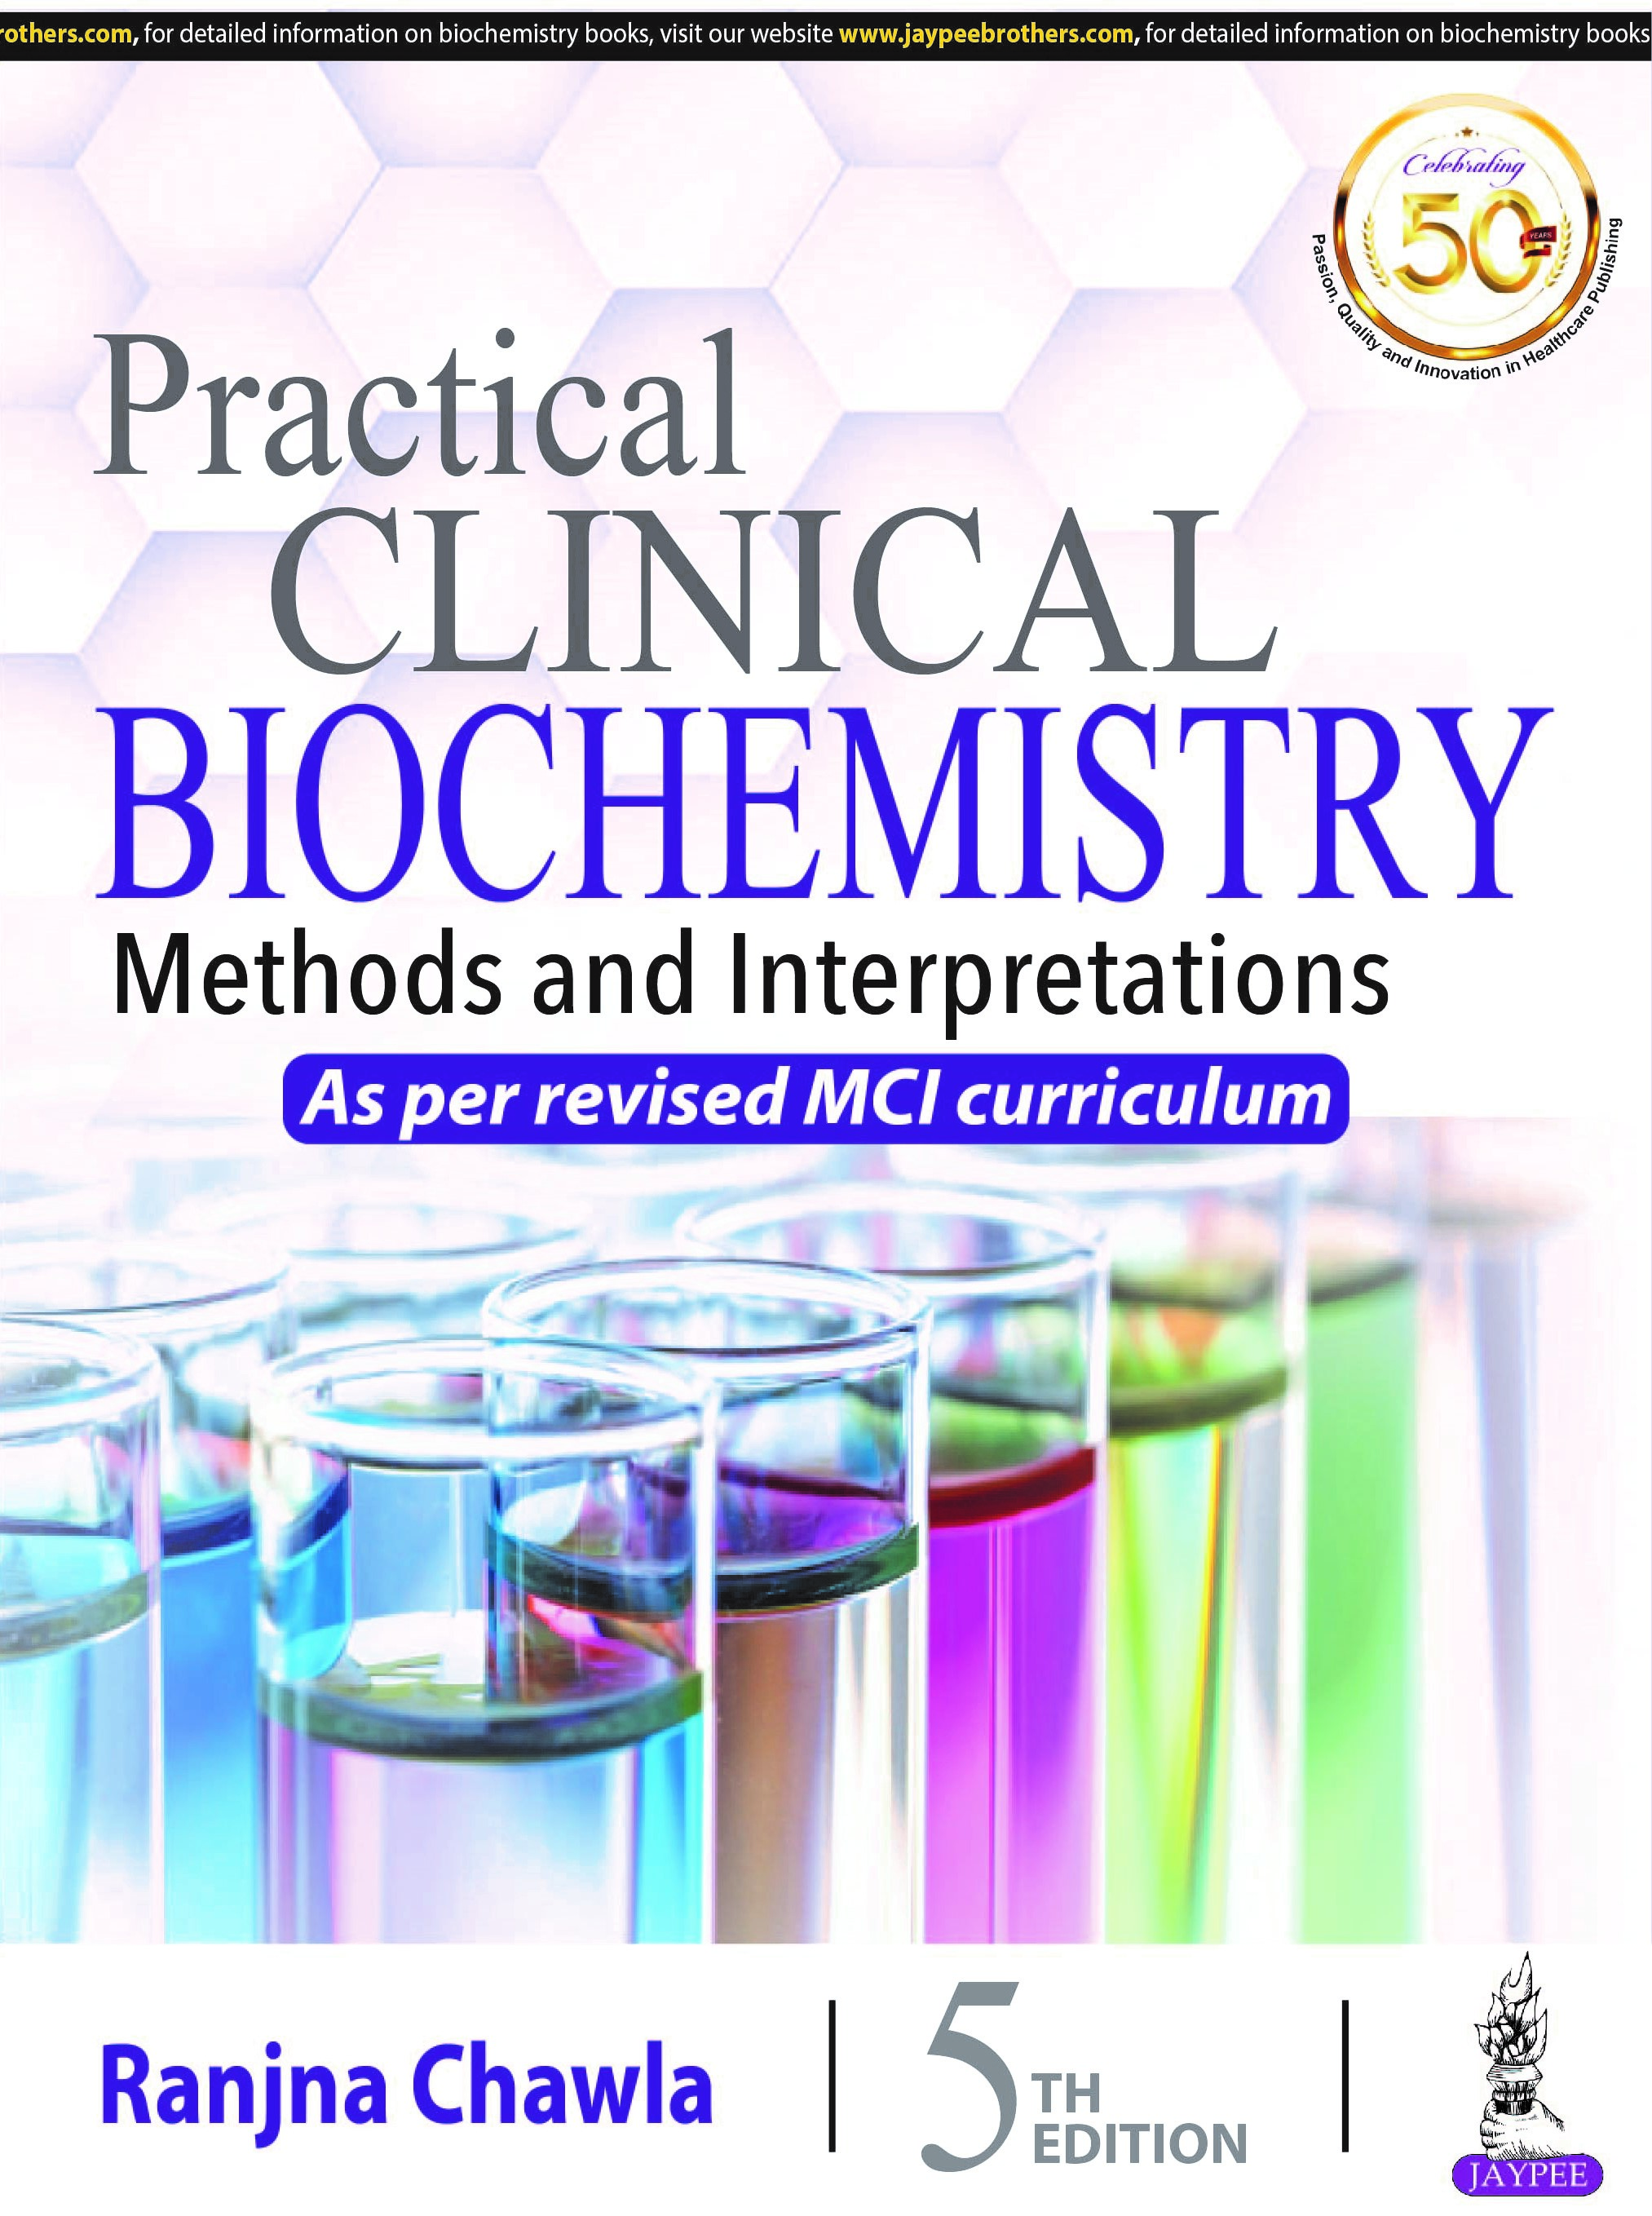 Practical Clinical Biochemistry Methods And Interpretations